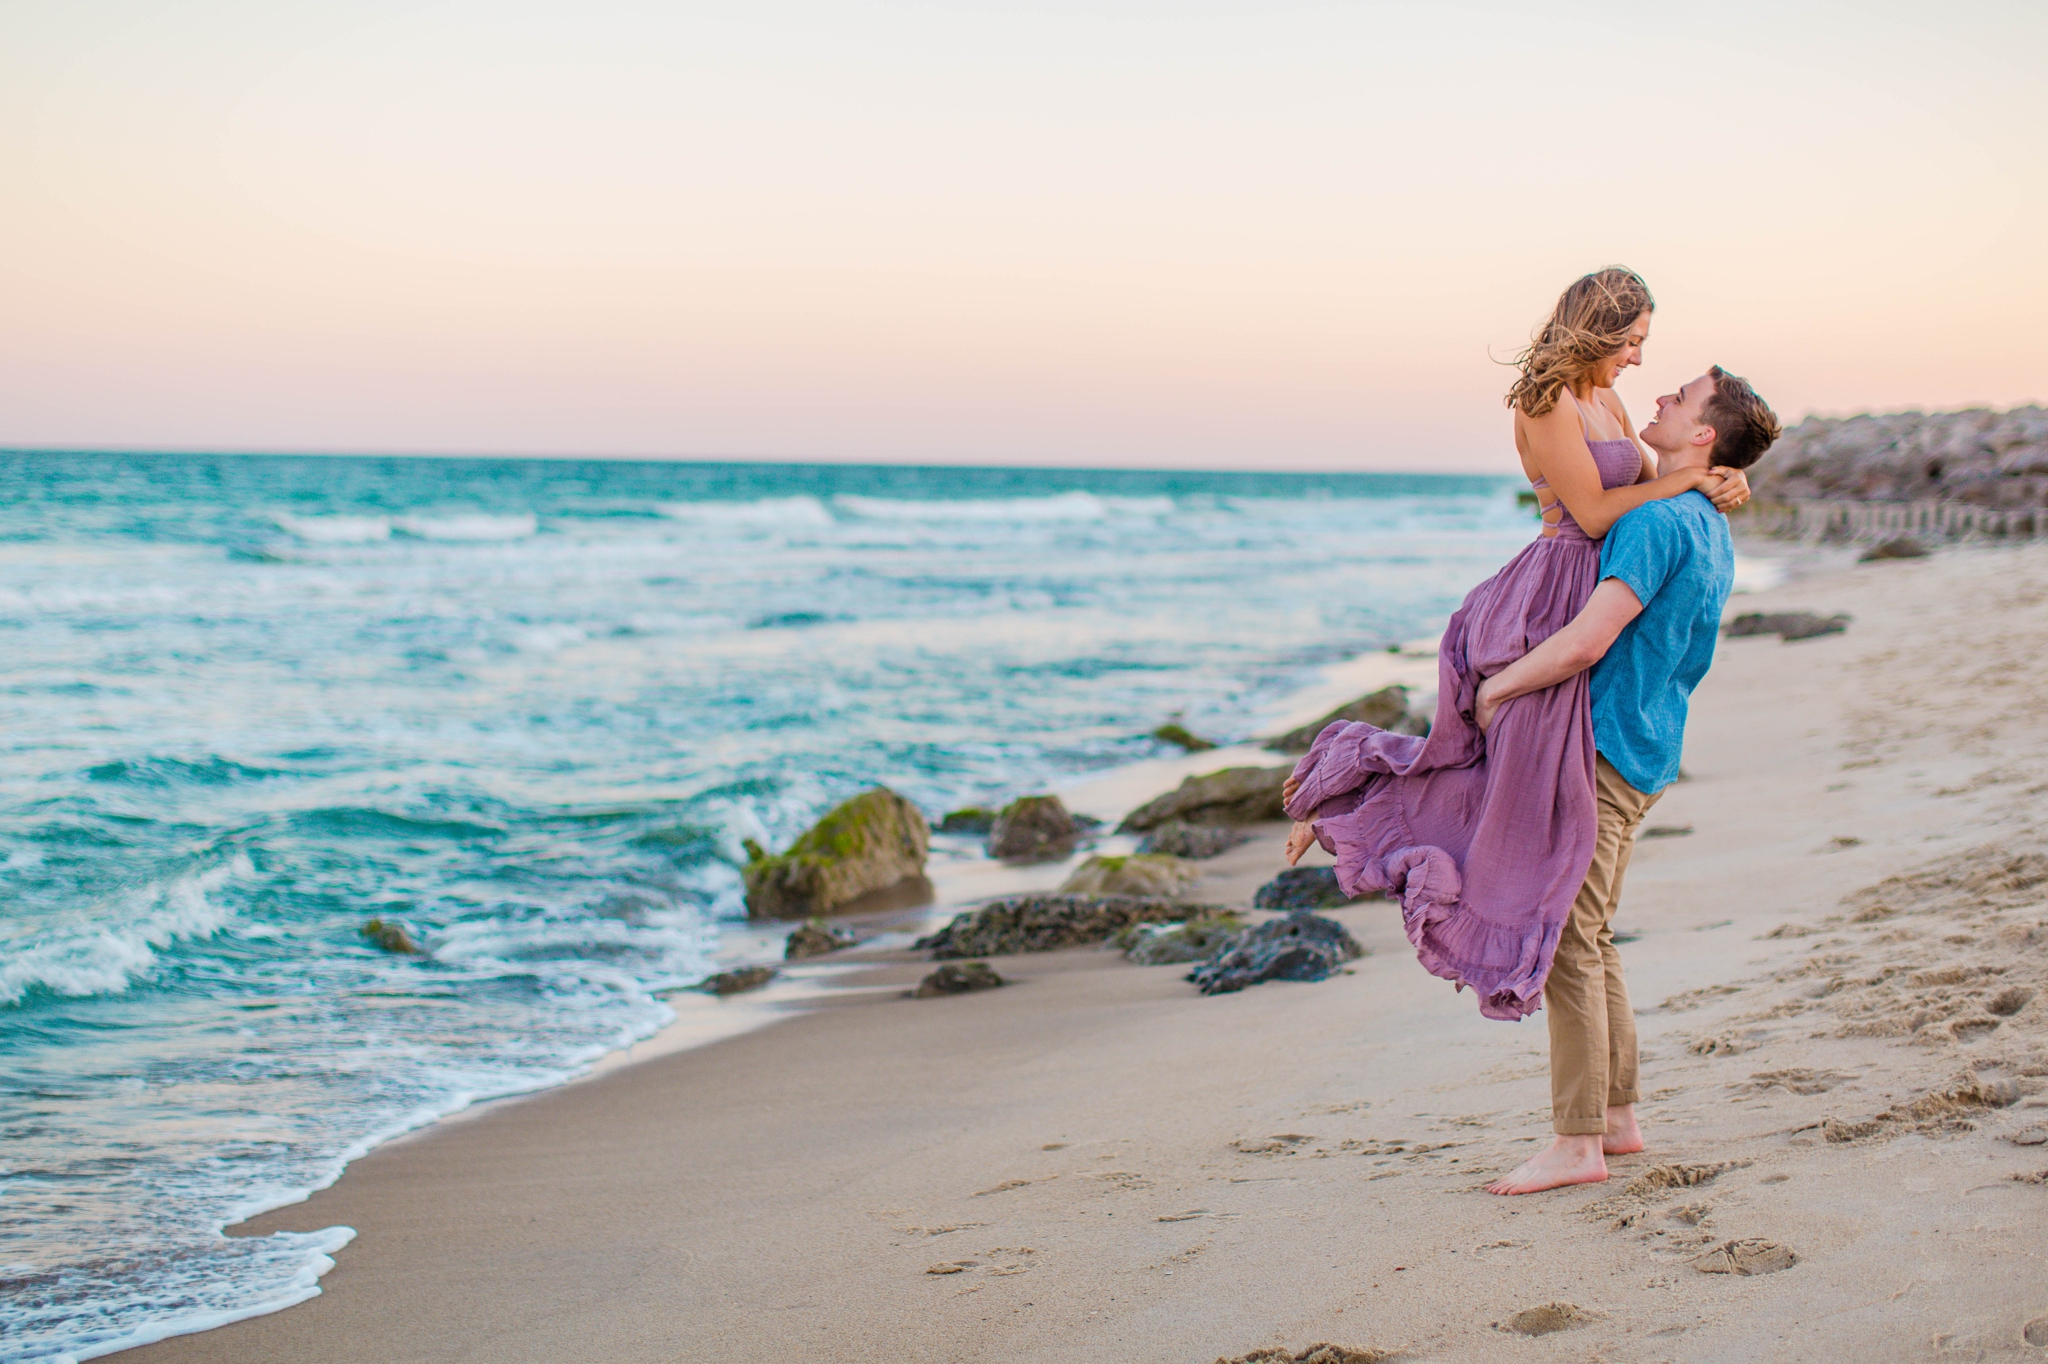  fiance picking up his girl - - Woman is in a flowy pastel maxi dress - candid and unposed golden light session - beach engagement photographer in honolulu, oahu, hawaii - johanna dye photography 